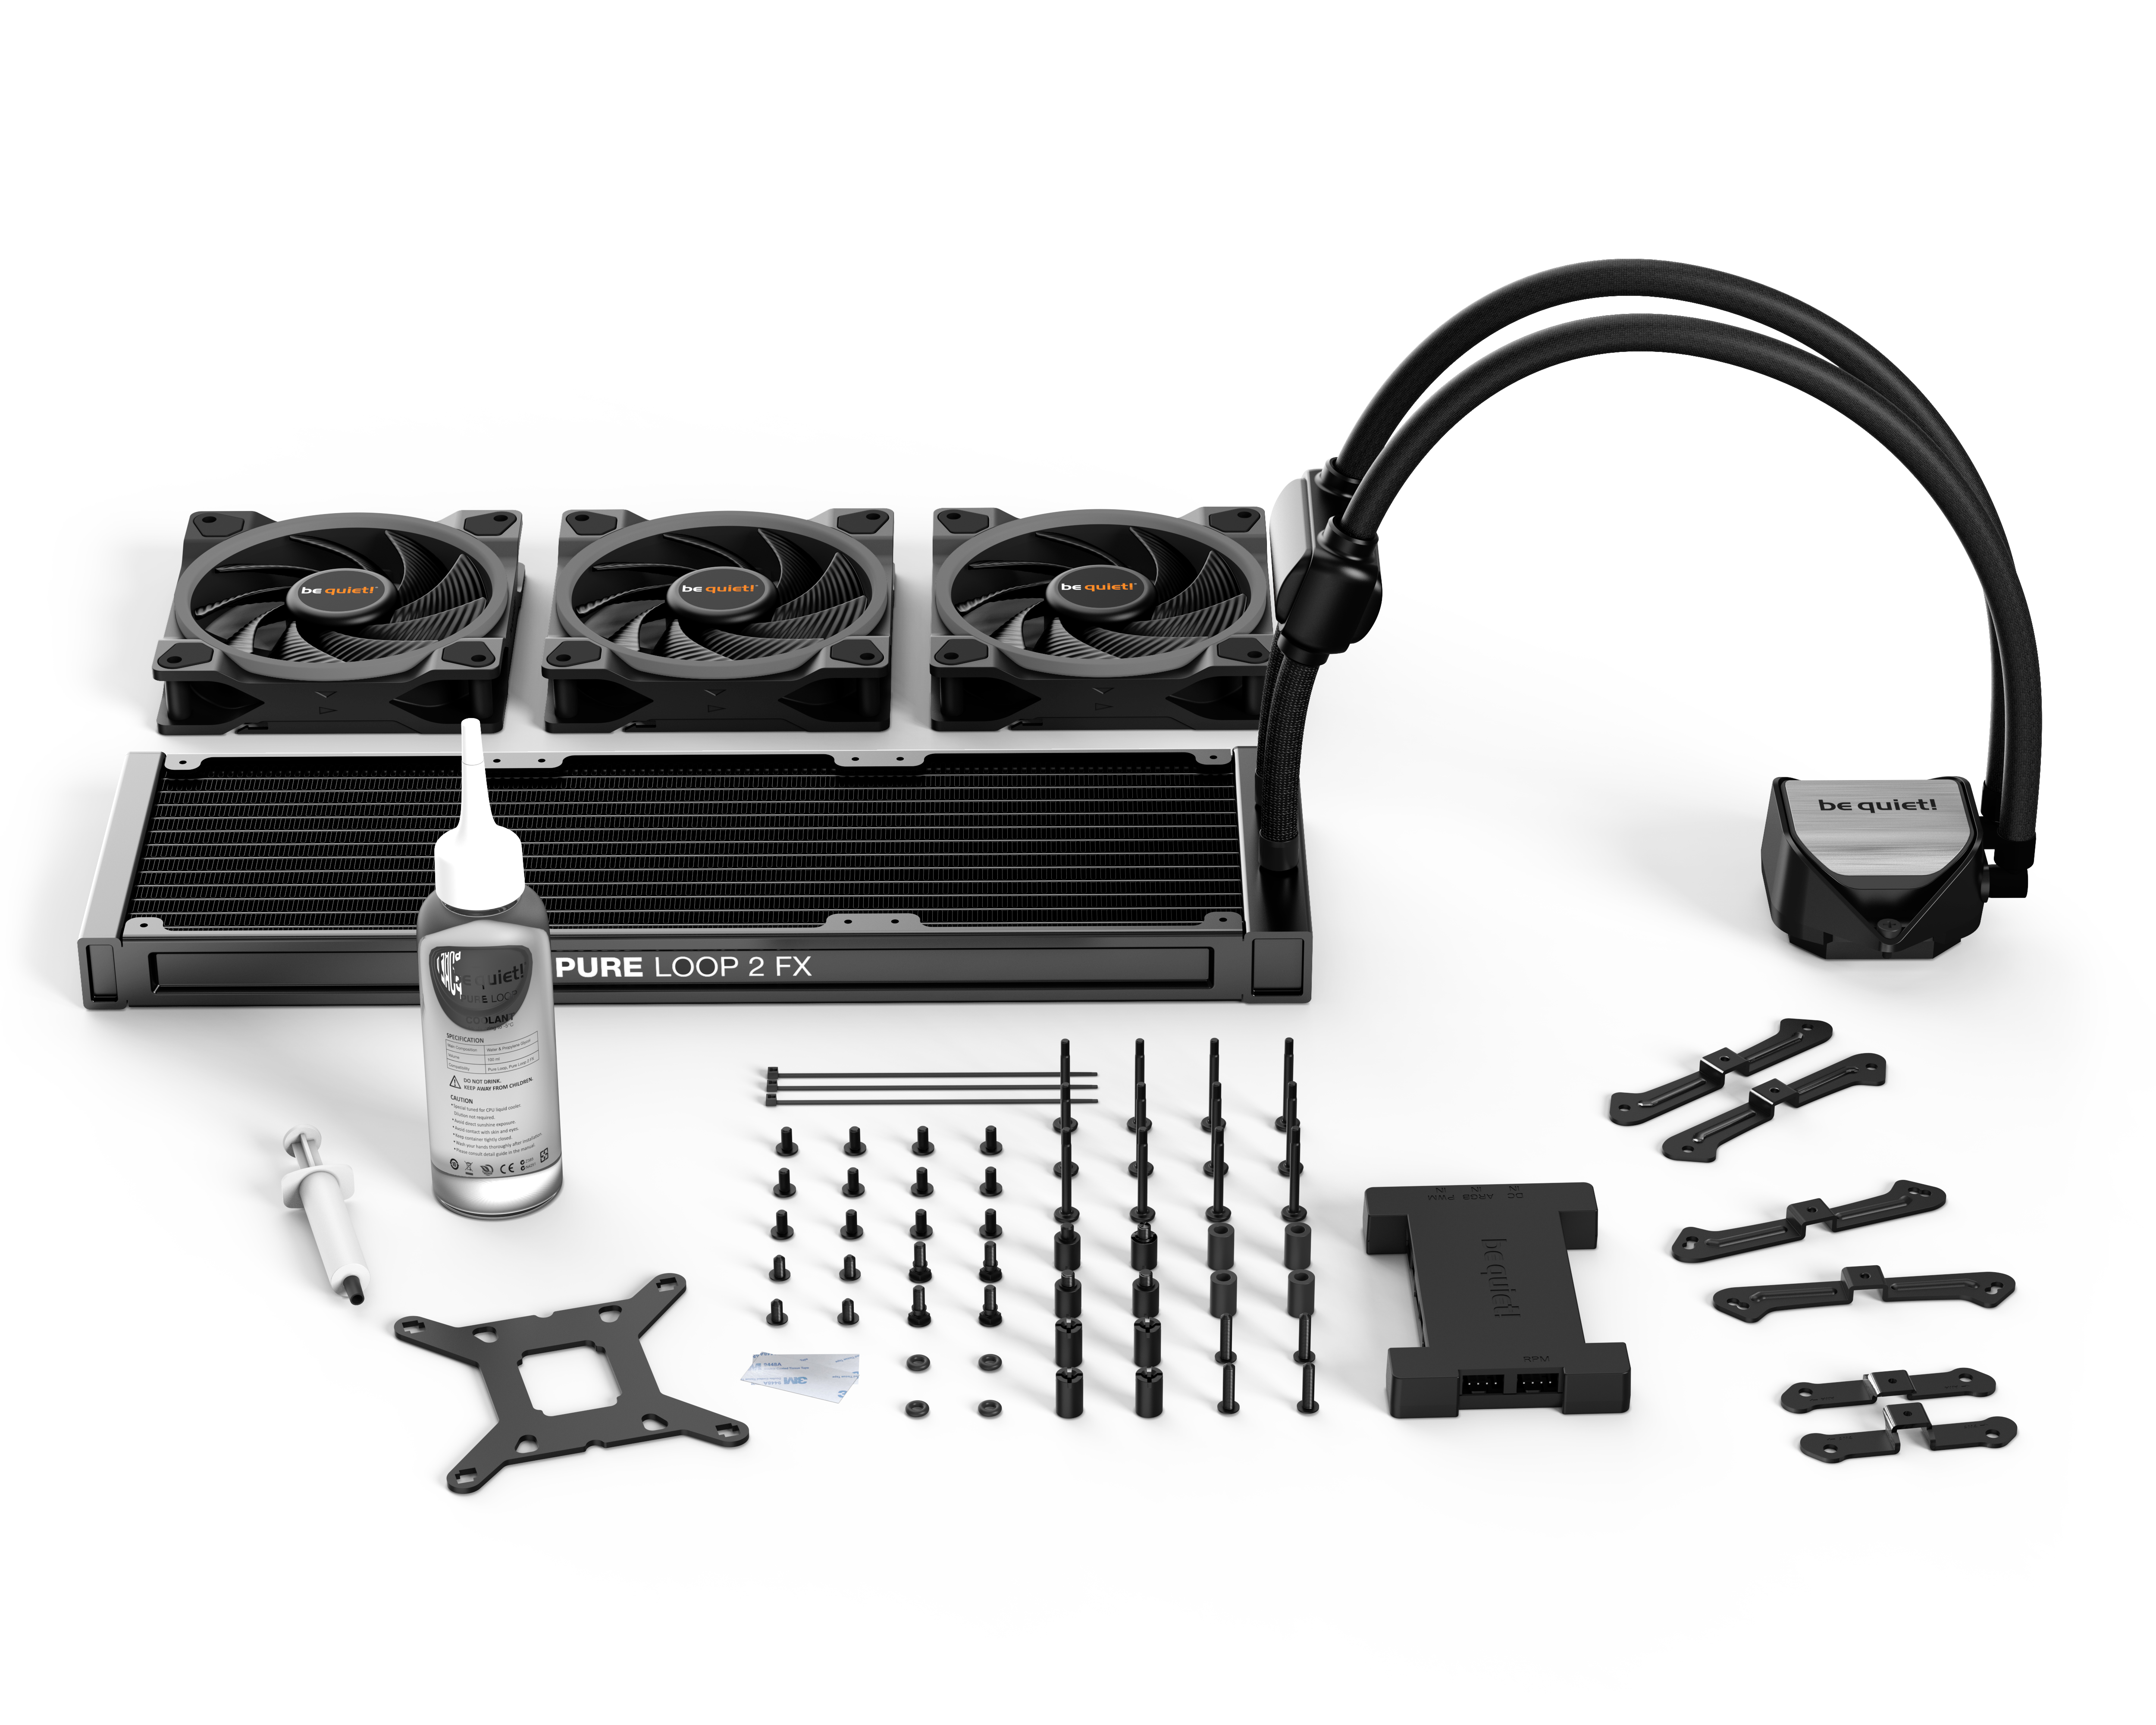 A large marketing image providing additional information about the product be quiet! Pure Loop 2 FX 360mm AIO CPU Cooler - Additional alt info not provided